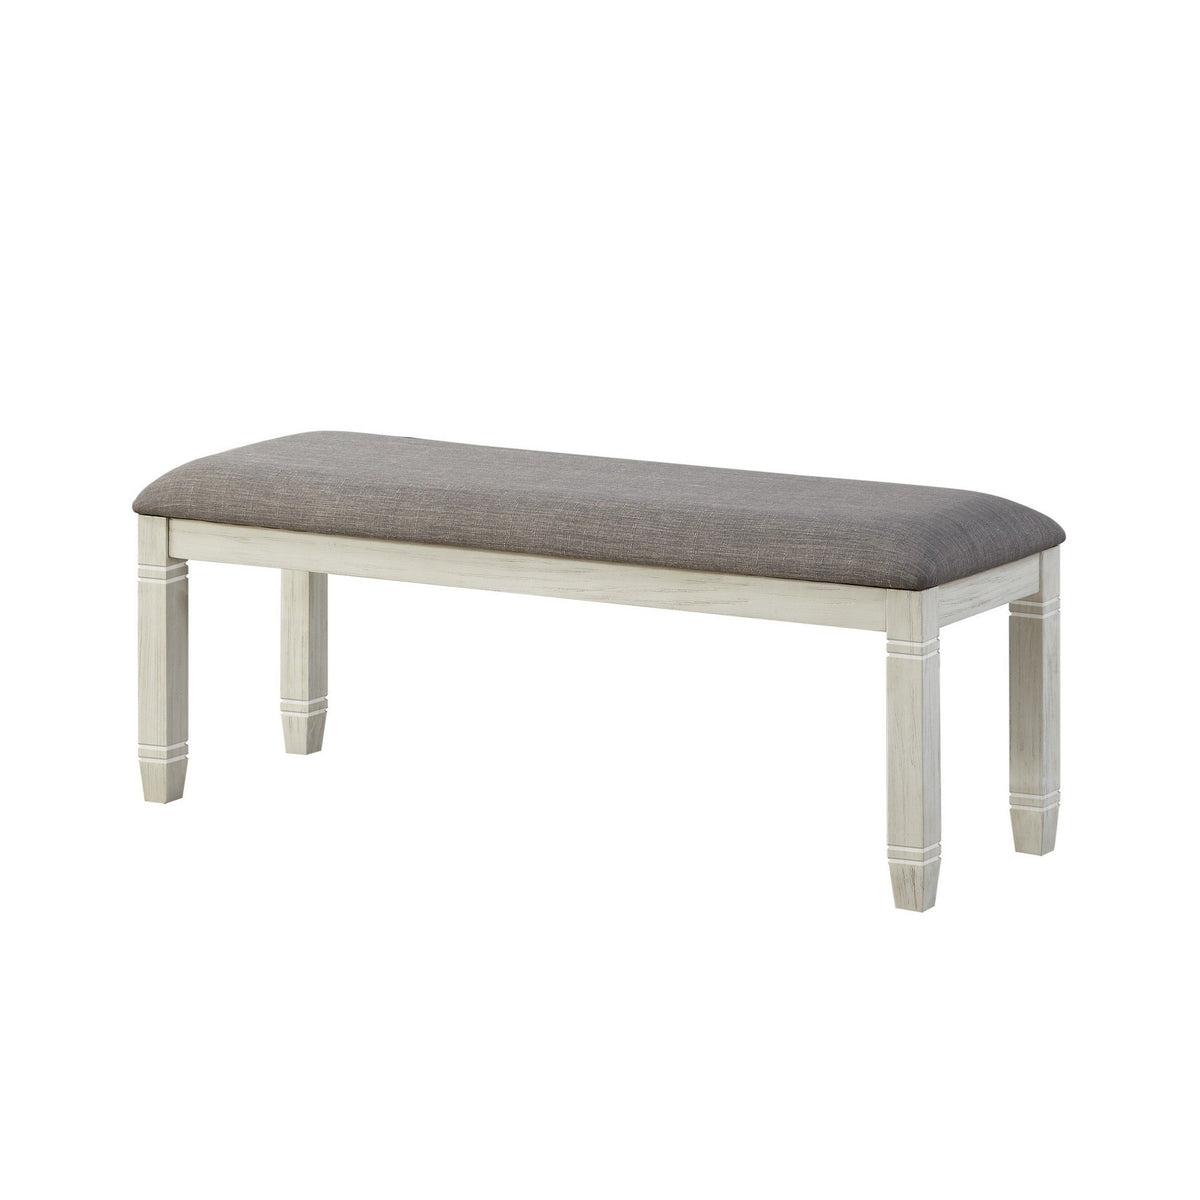 Fabric Upholstered Padded Bench with Tapered Feet, Antique White and Gray - BM219962